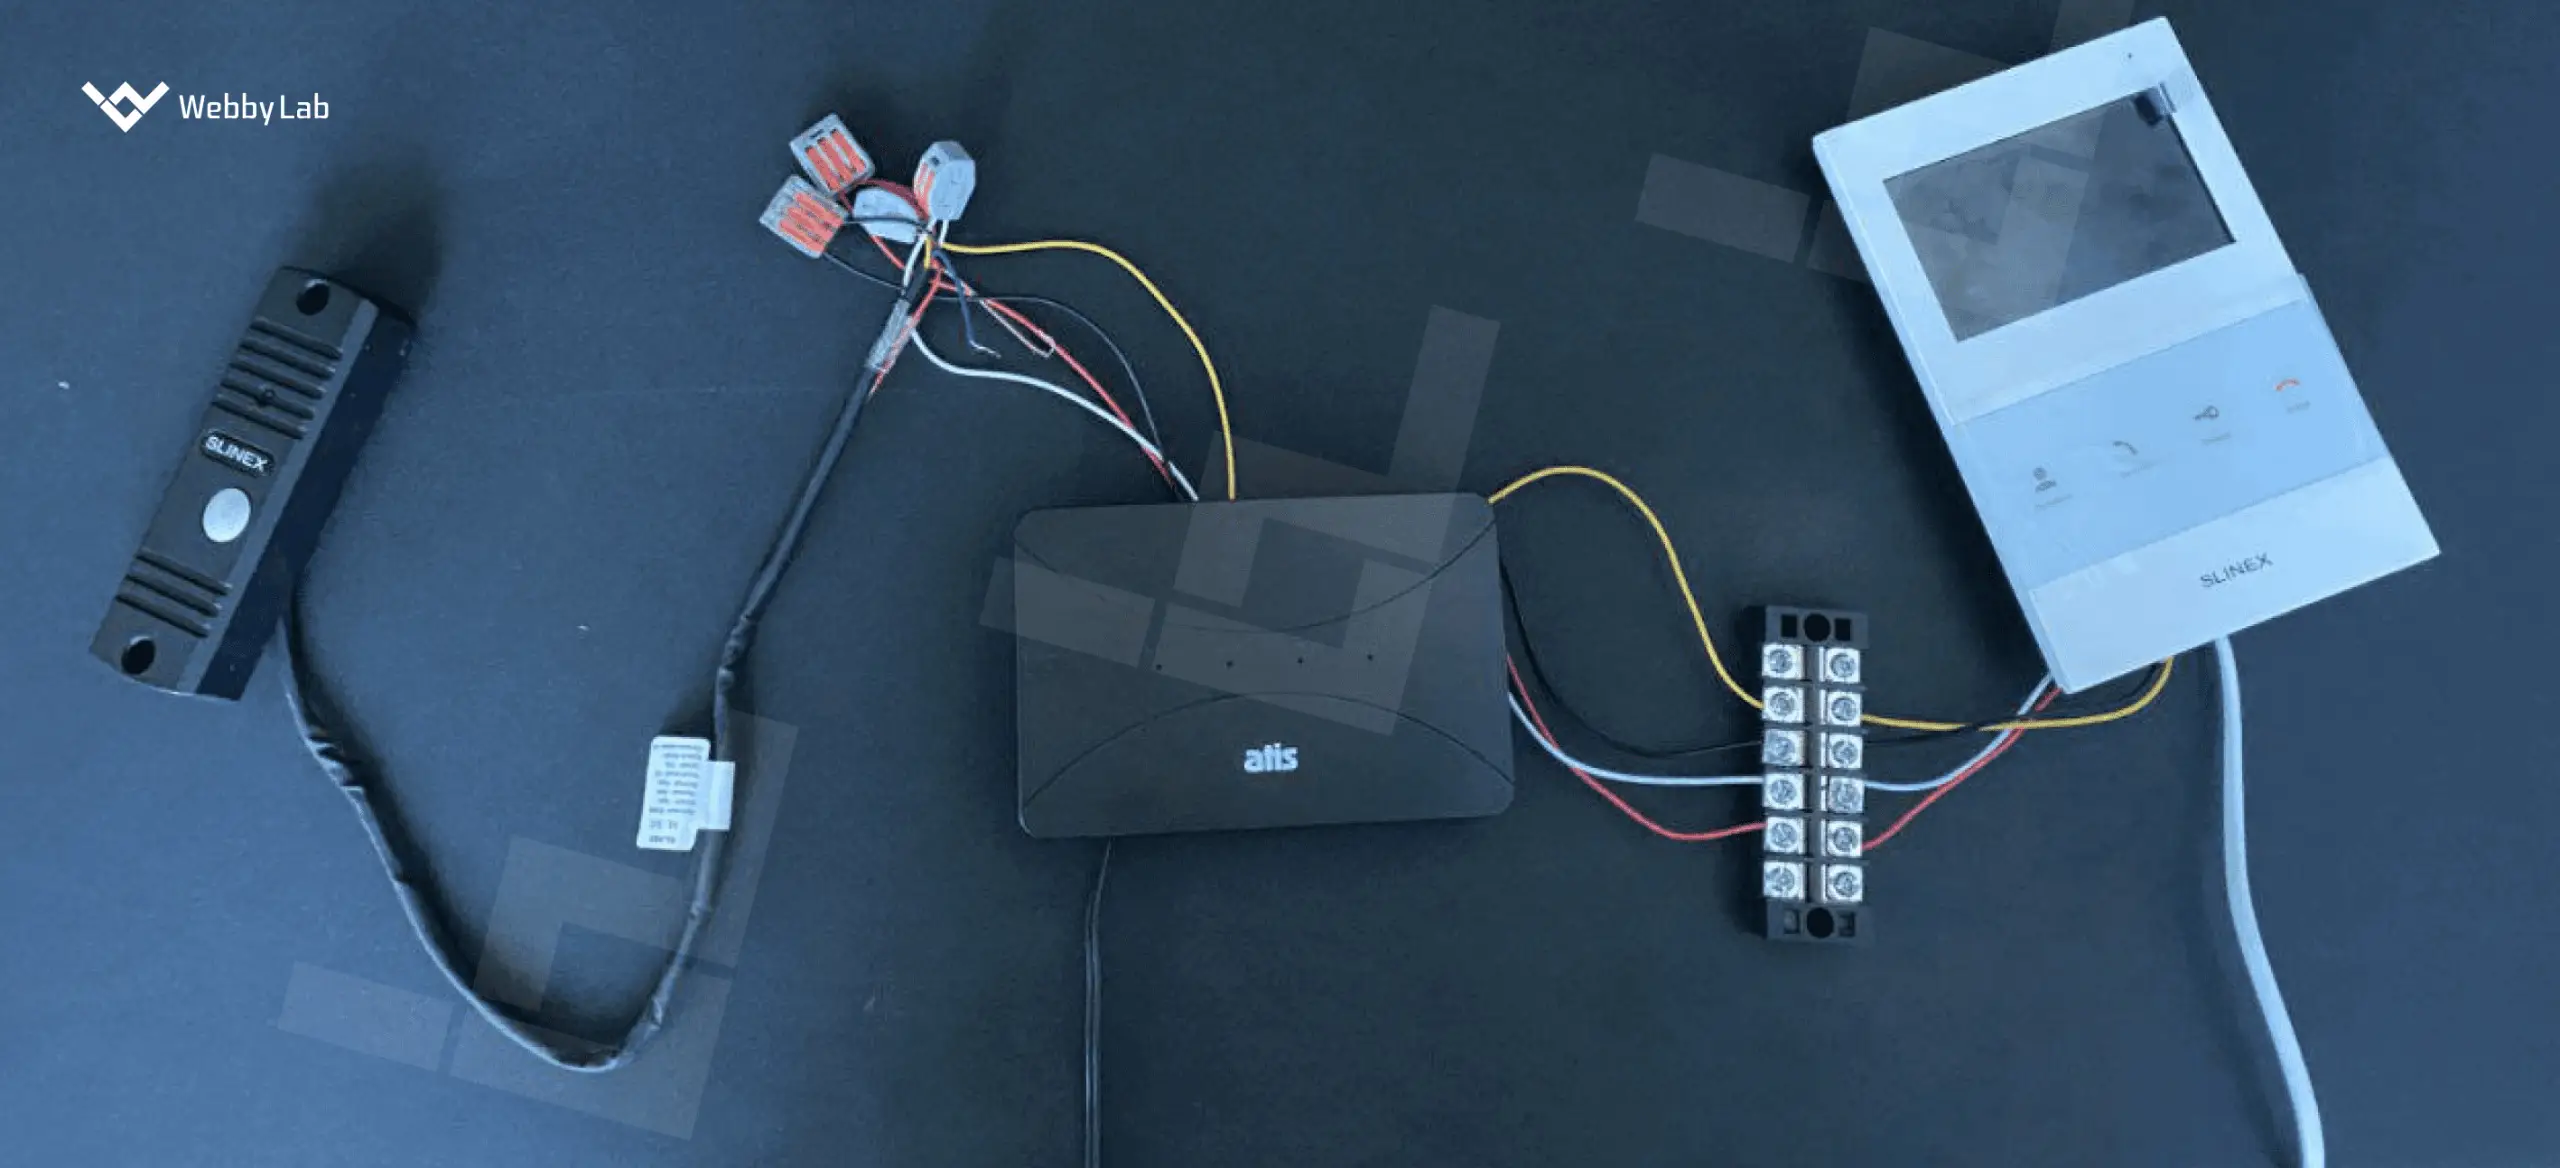 Testing of the analog intercom inverter conducted by WebbyLab